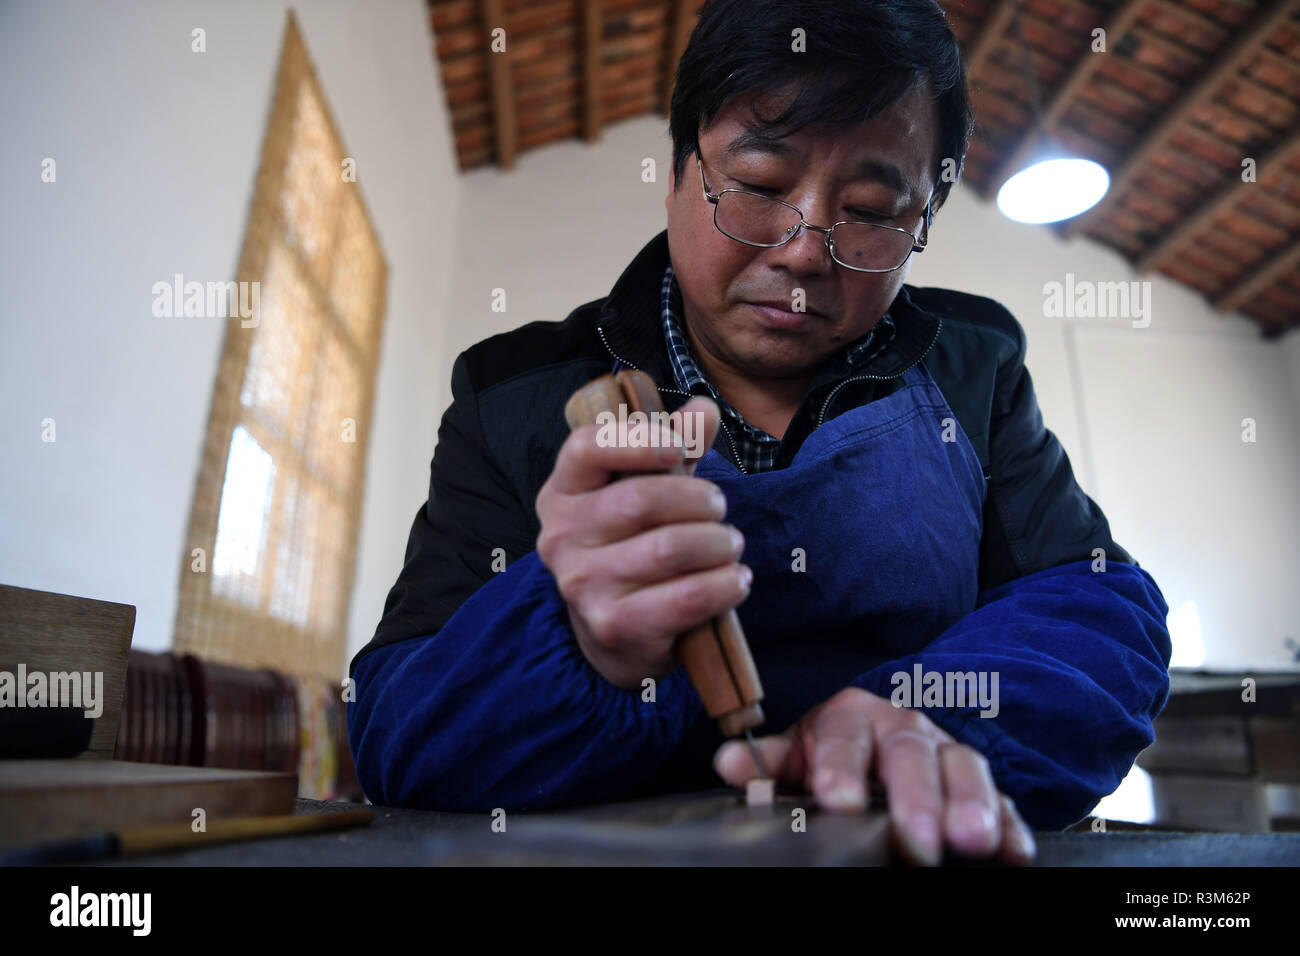 (181124) -- JINGXIAN, Nov. 24, 2018 (Xinhua) -- Lei Shitai works in Chanshan Village of Qinxi Town, Jingxian County, in east China's Anhui Province, Nov. 23, 2018. Lei, 52, born in neighboring Jiangxi Province, started his career as a typography printer when he finished his apprenticeship with his uncle who he followed since he was 17. The traditional printing method witnessed an increasingly hard time in the recent years as a livelihood. It was in 2017 when he decided to move to Chanshan at the invitation of Kai Yuanhong, a local cabinet maker, to cooperate in a broader way. Lei is now workin Stock Photo